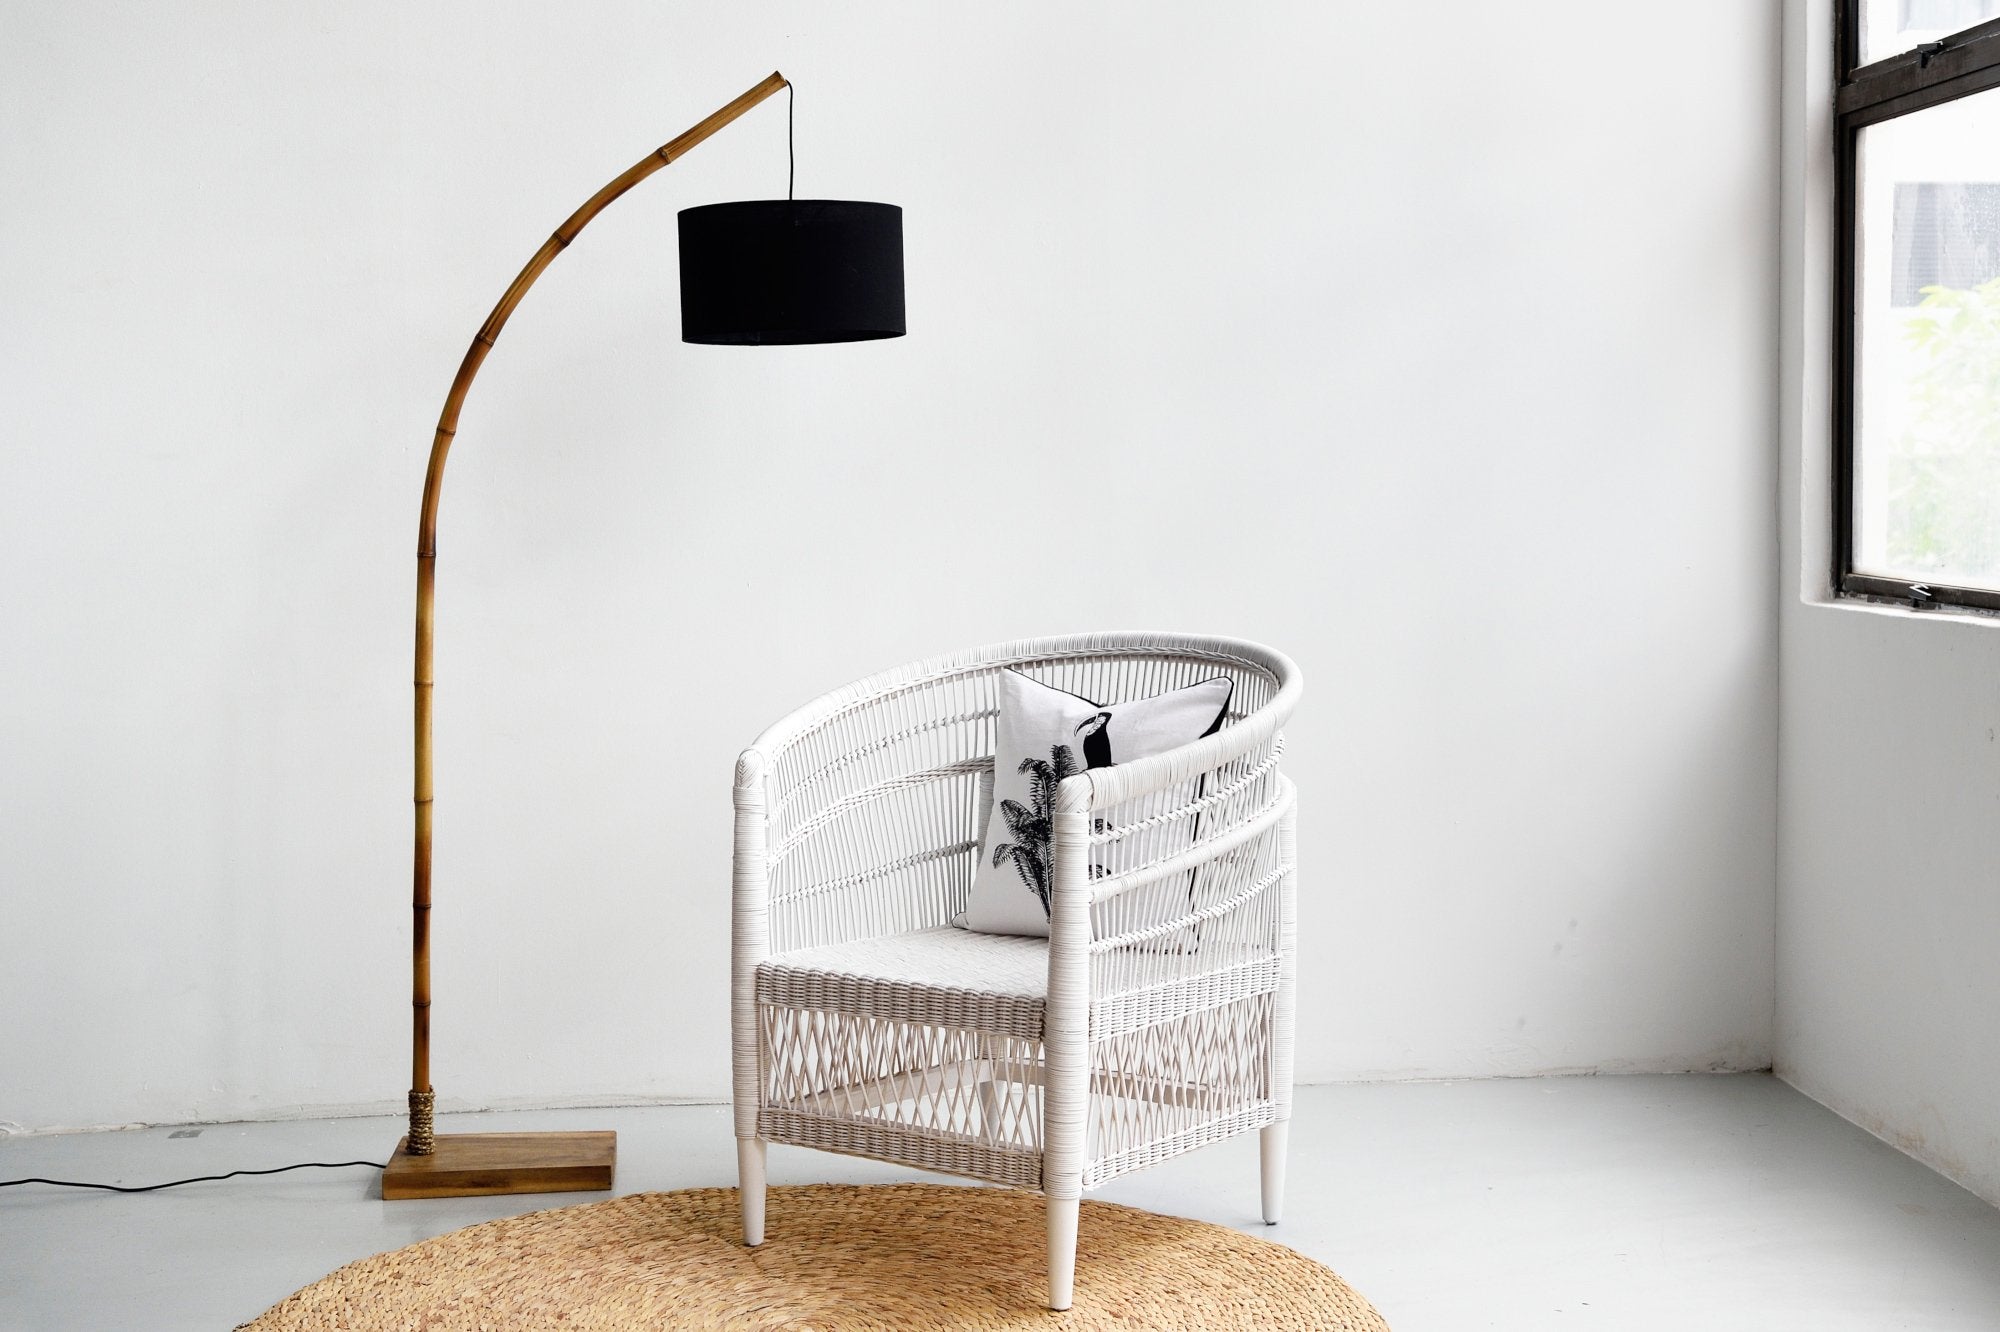 Bungalow standing lamp by Island Living